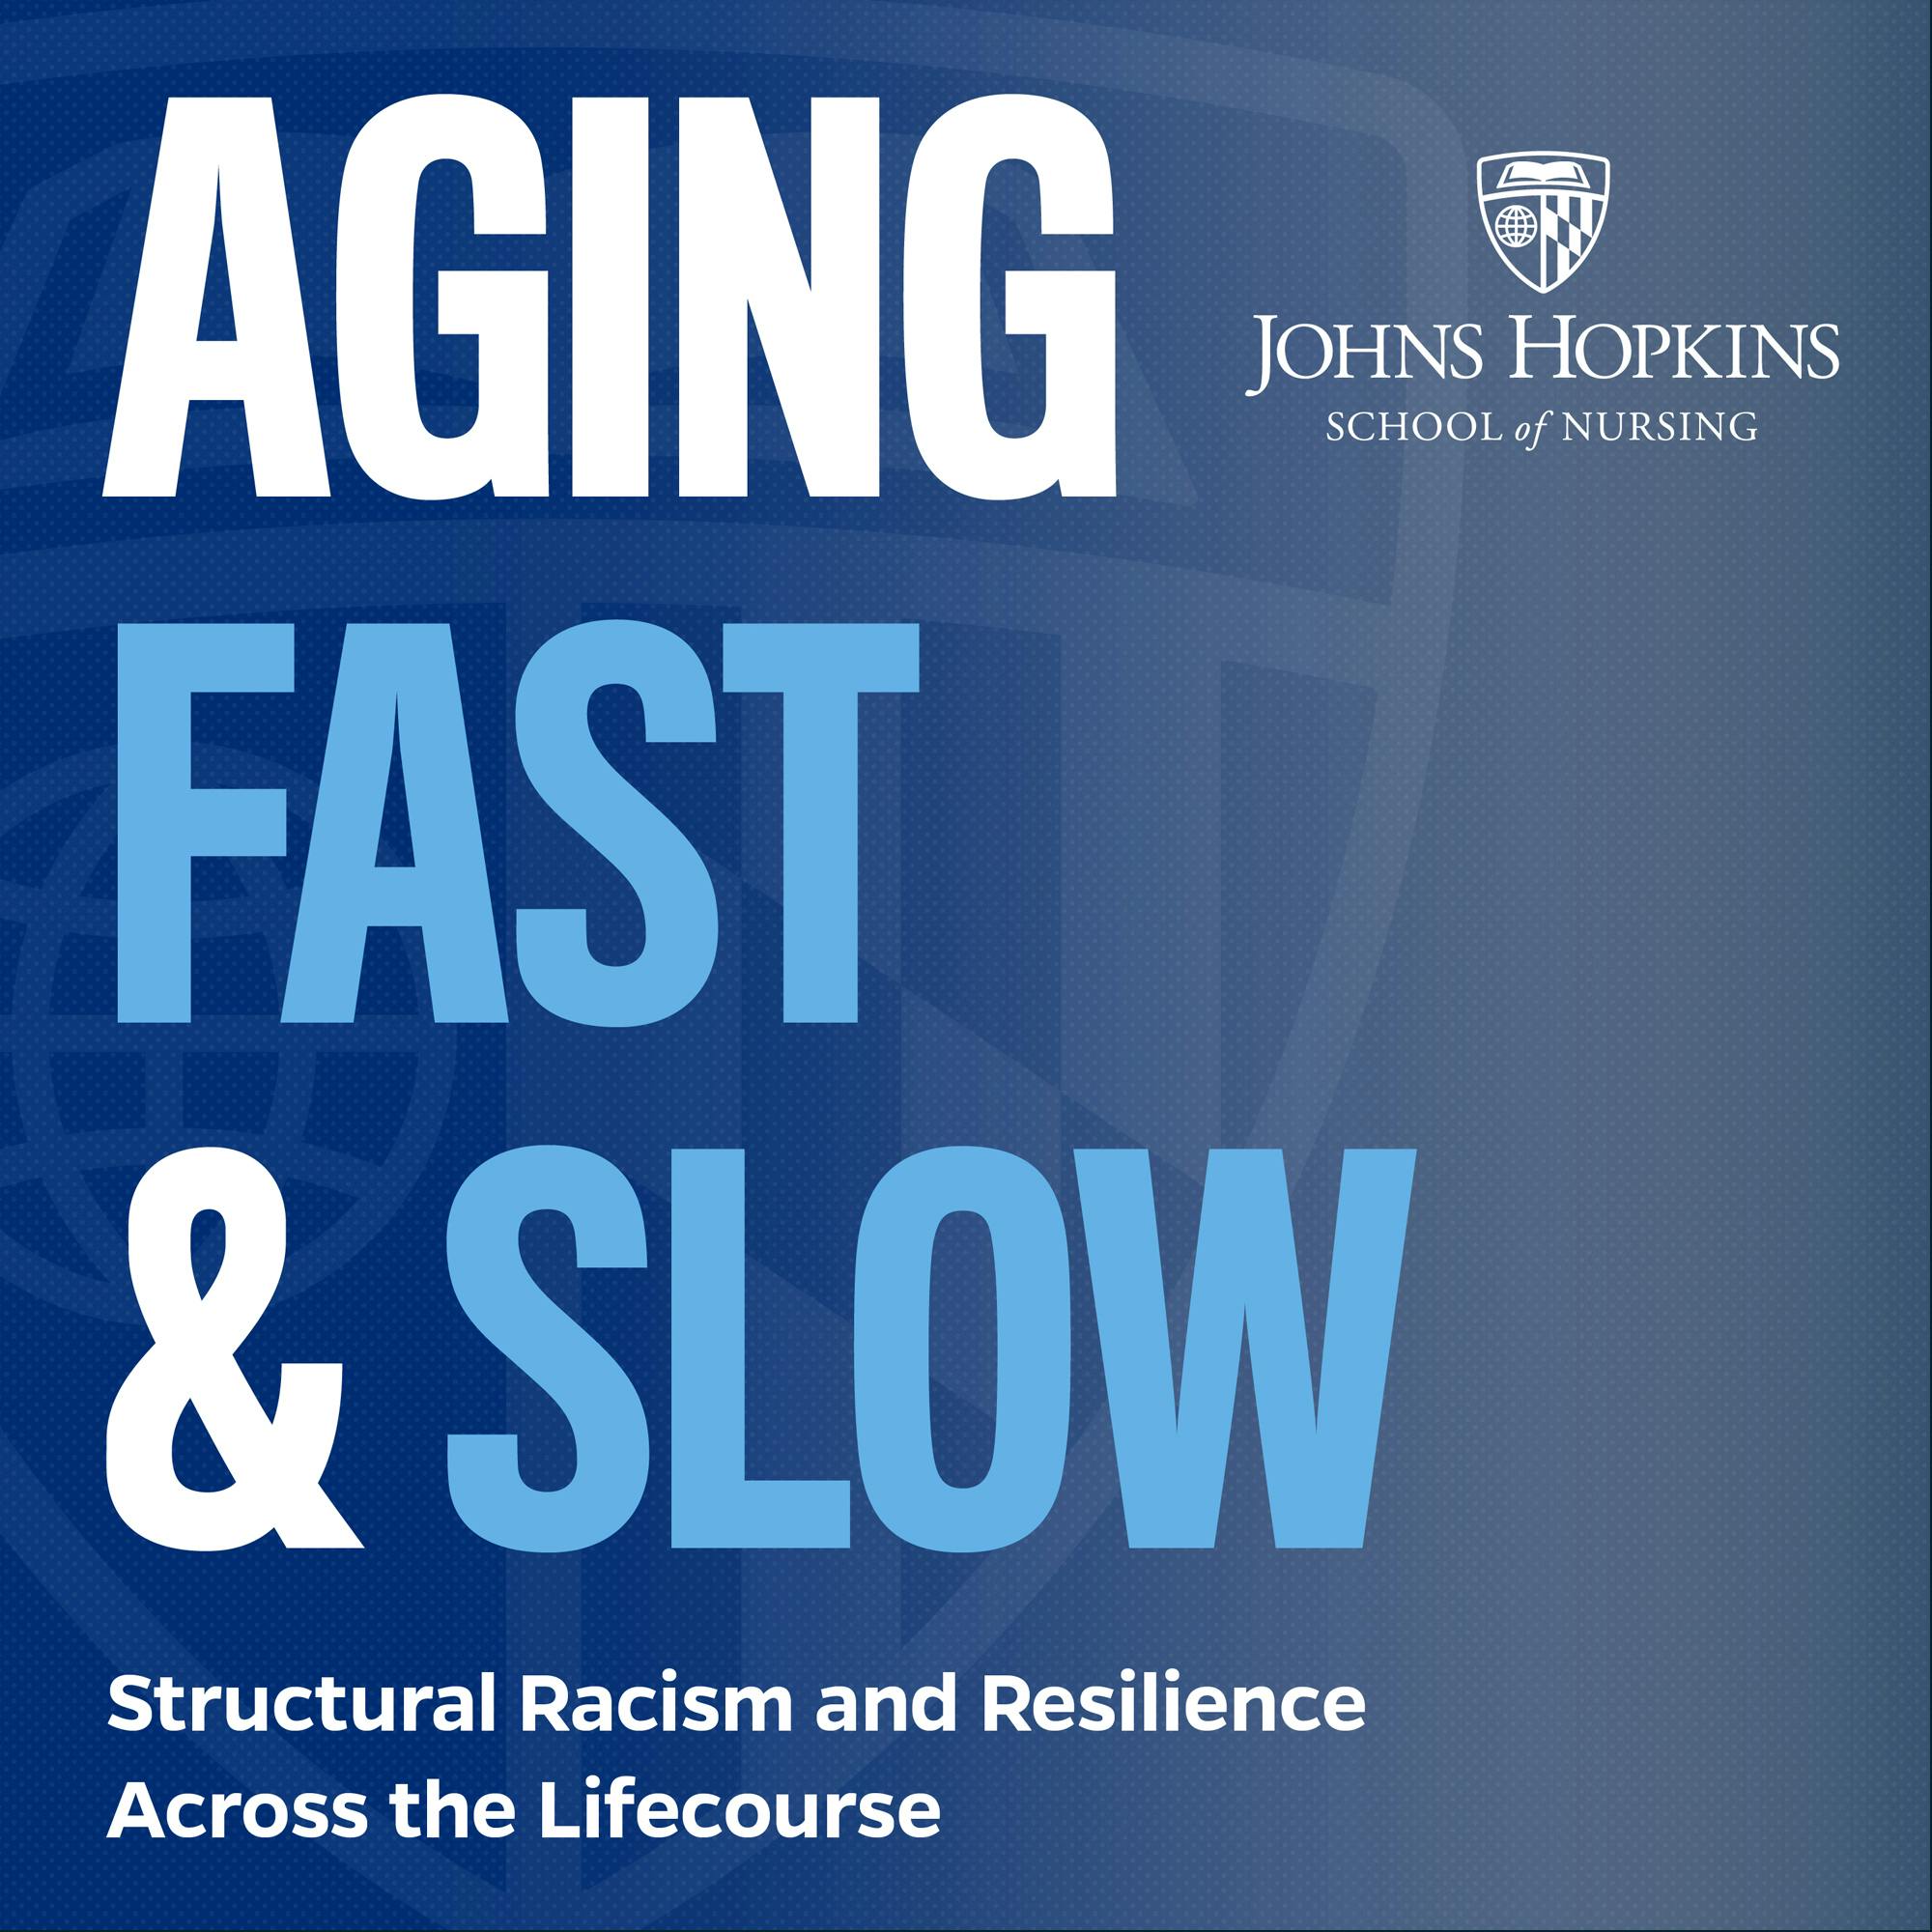 Aging Fast & Slow: Unearthing Root Causes of Structural Racism